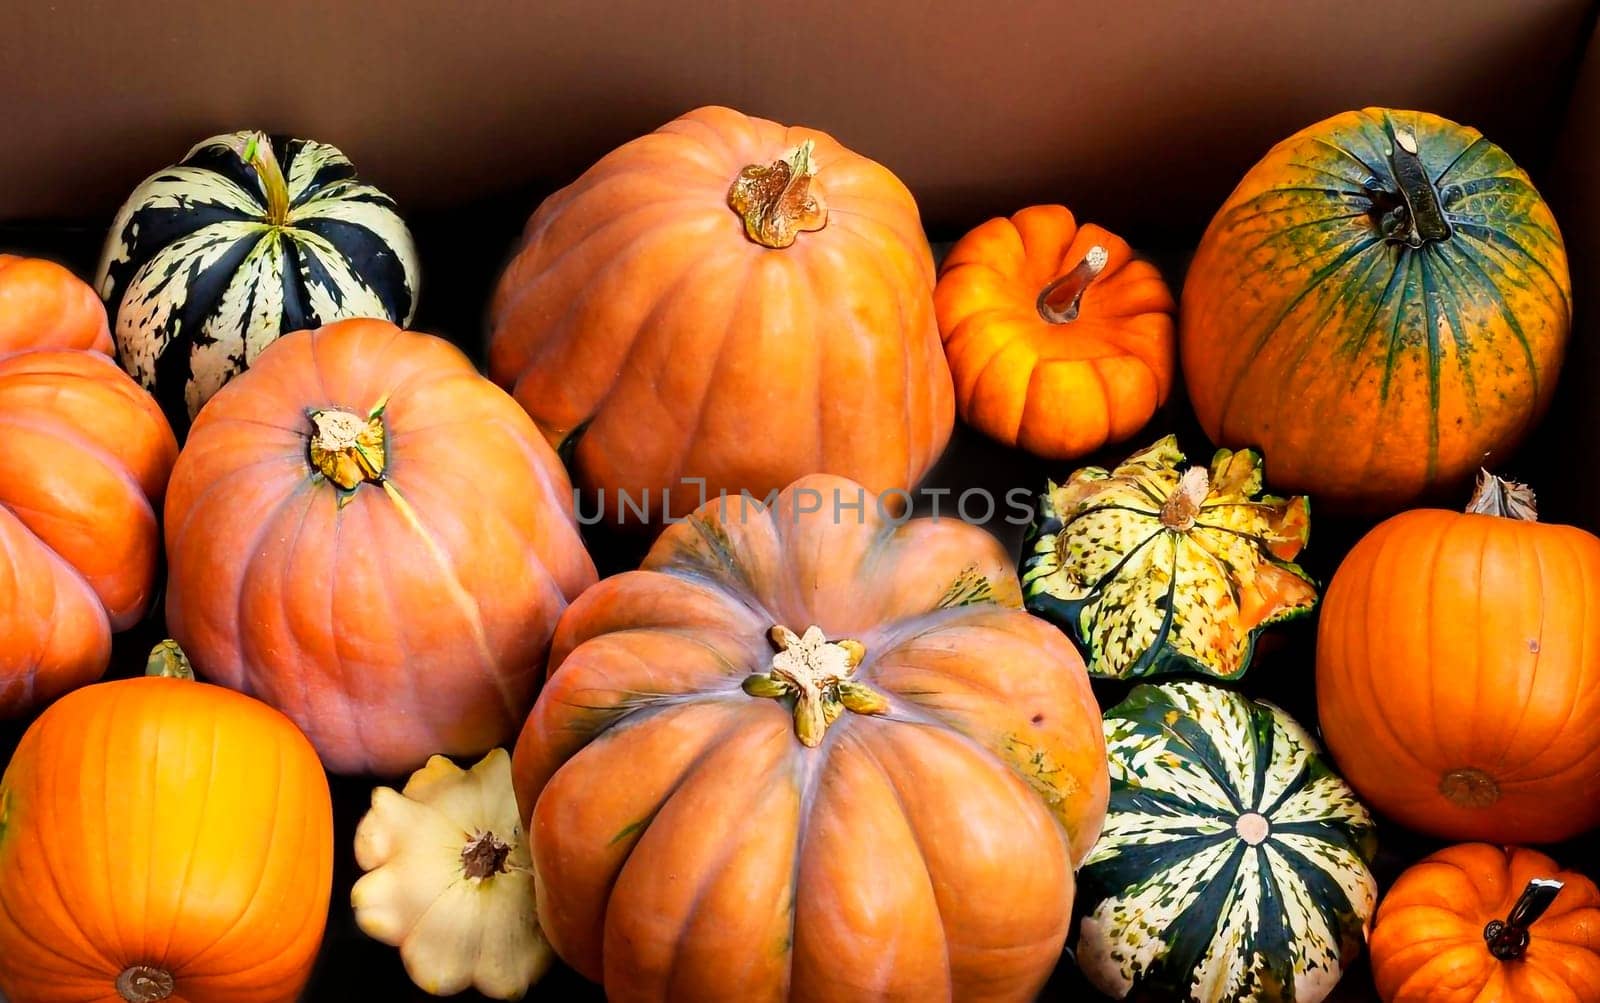 Pumpkins in box - a box with a variety of pumpkins